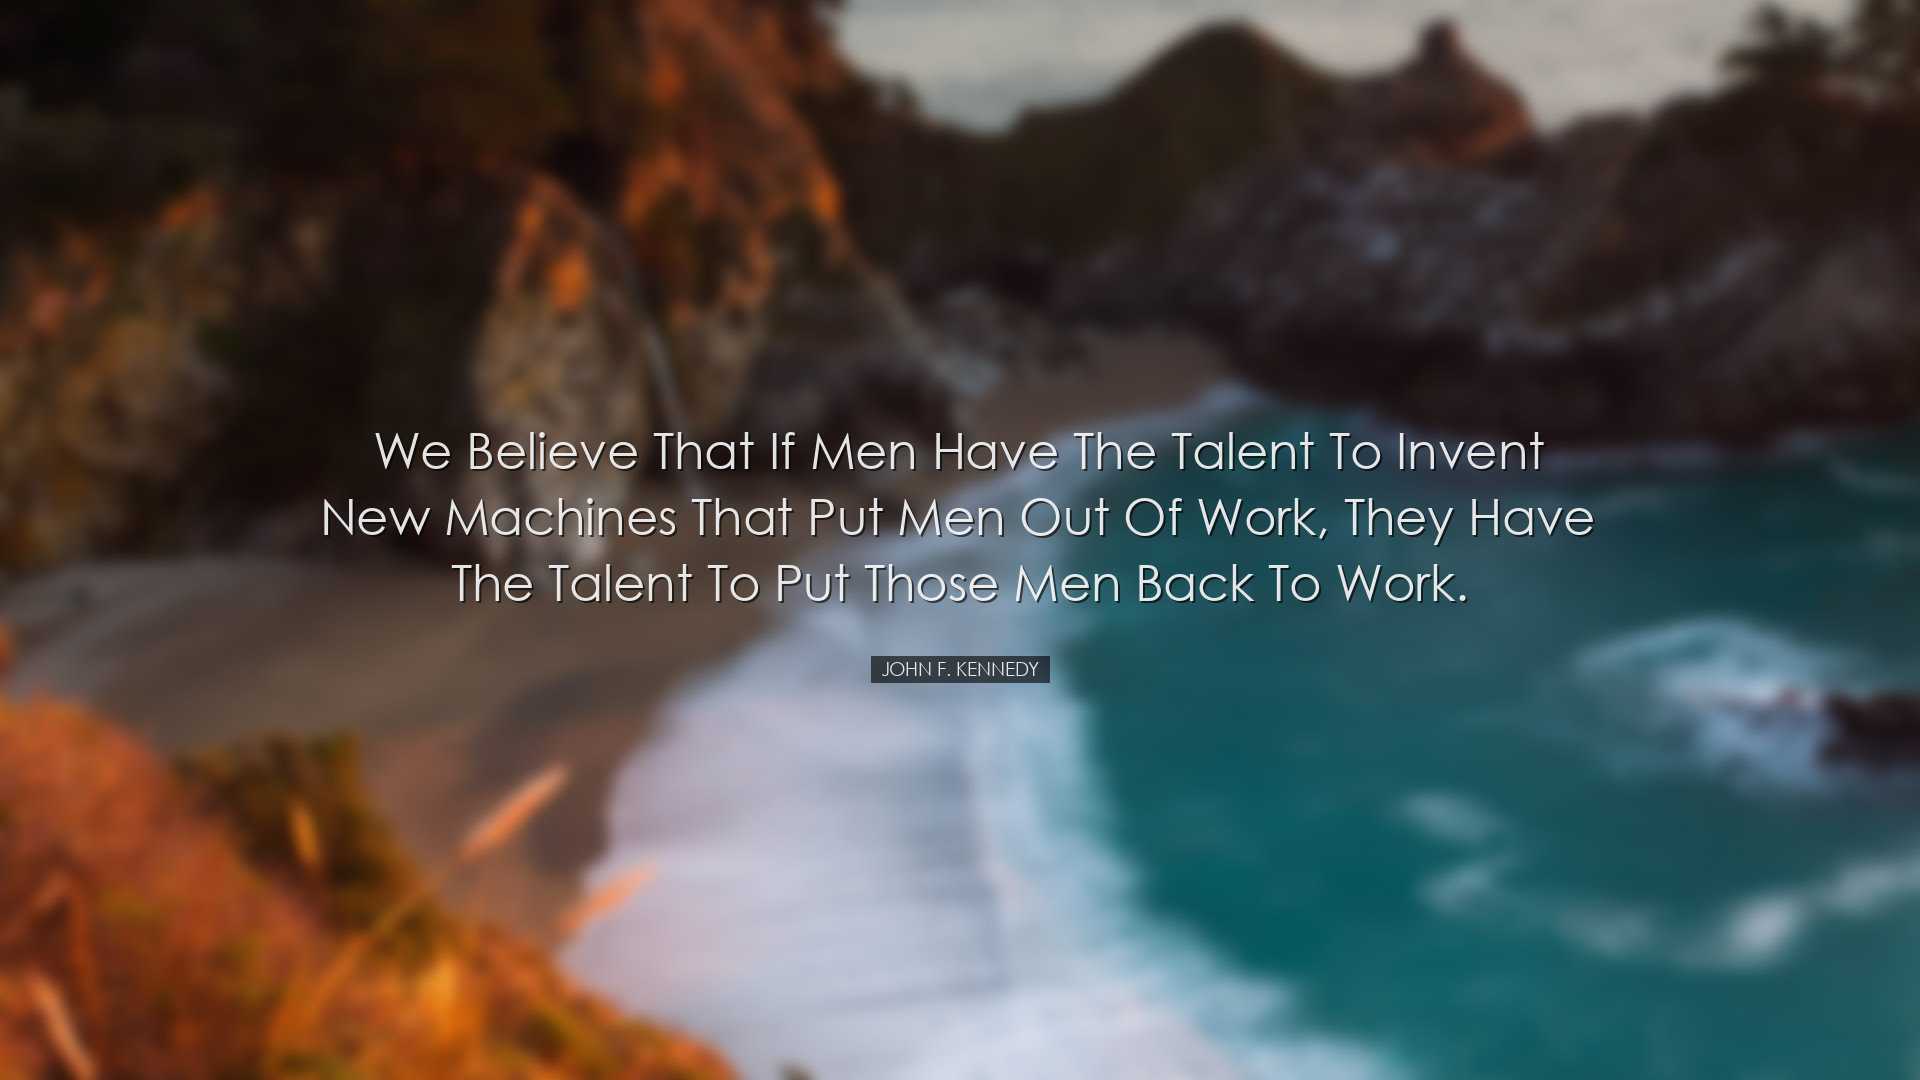 We believe that if men have the talent to invent new machines that